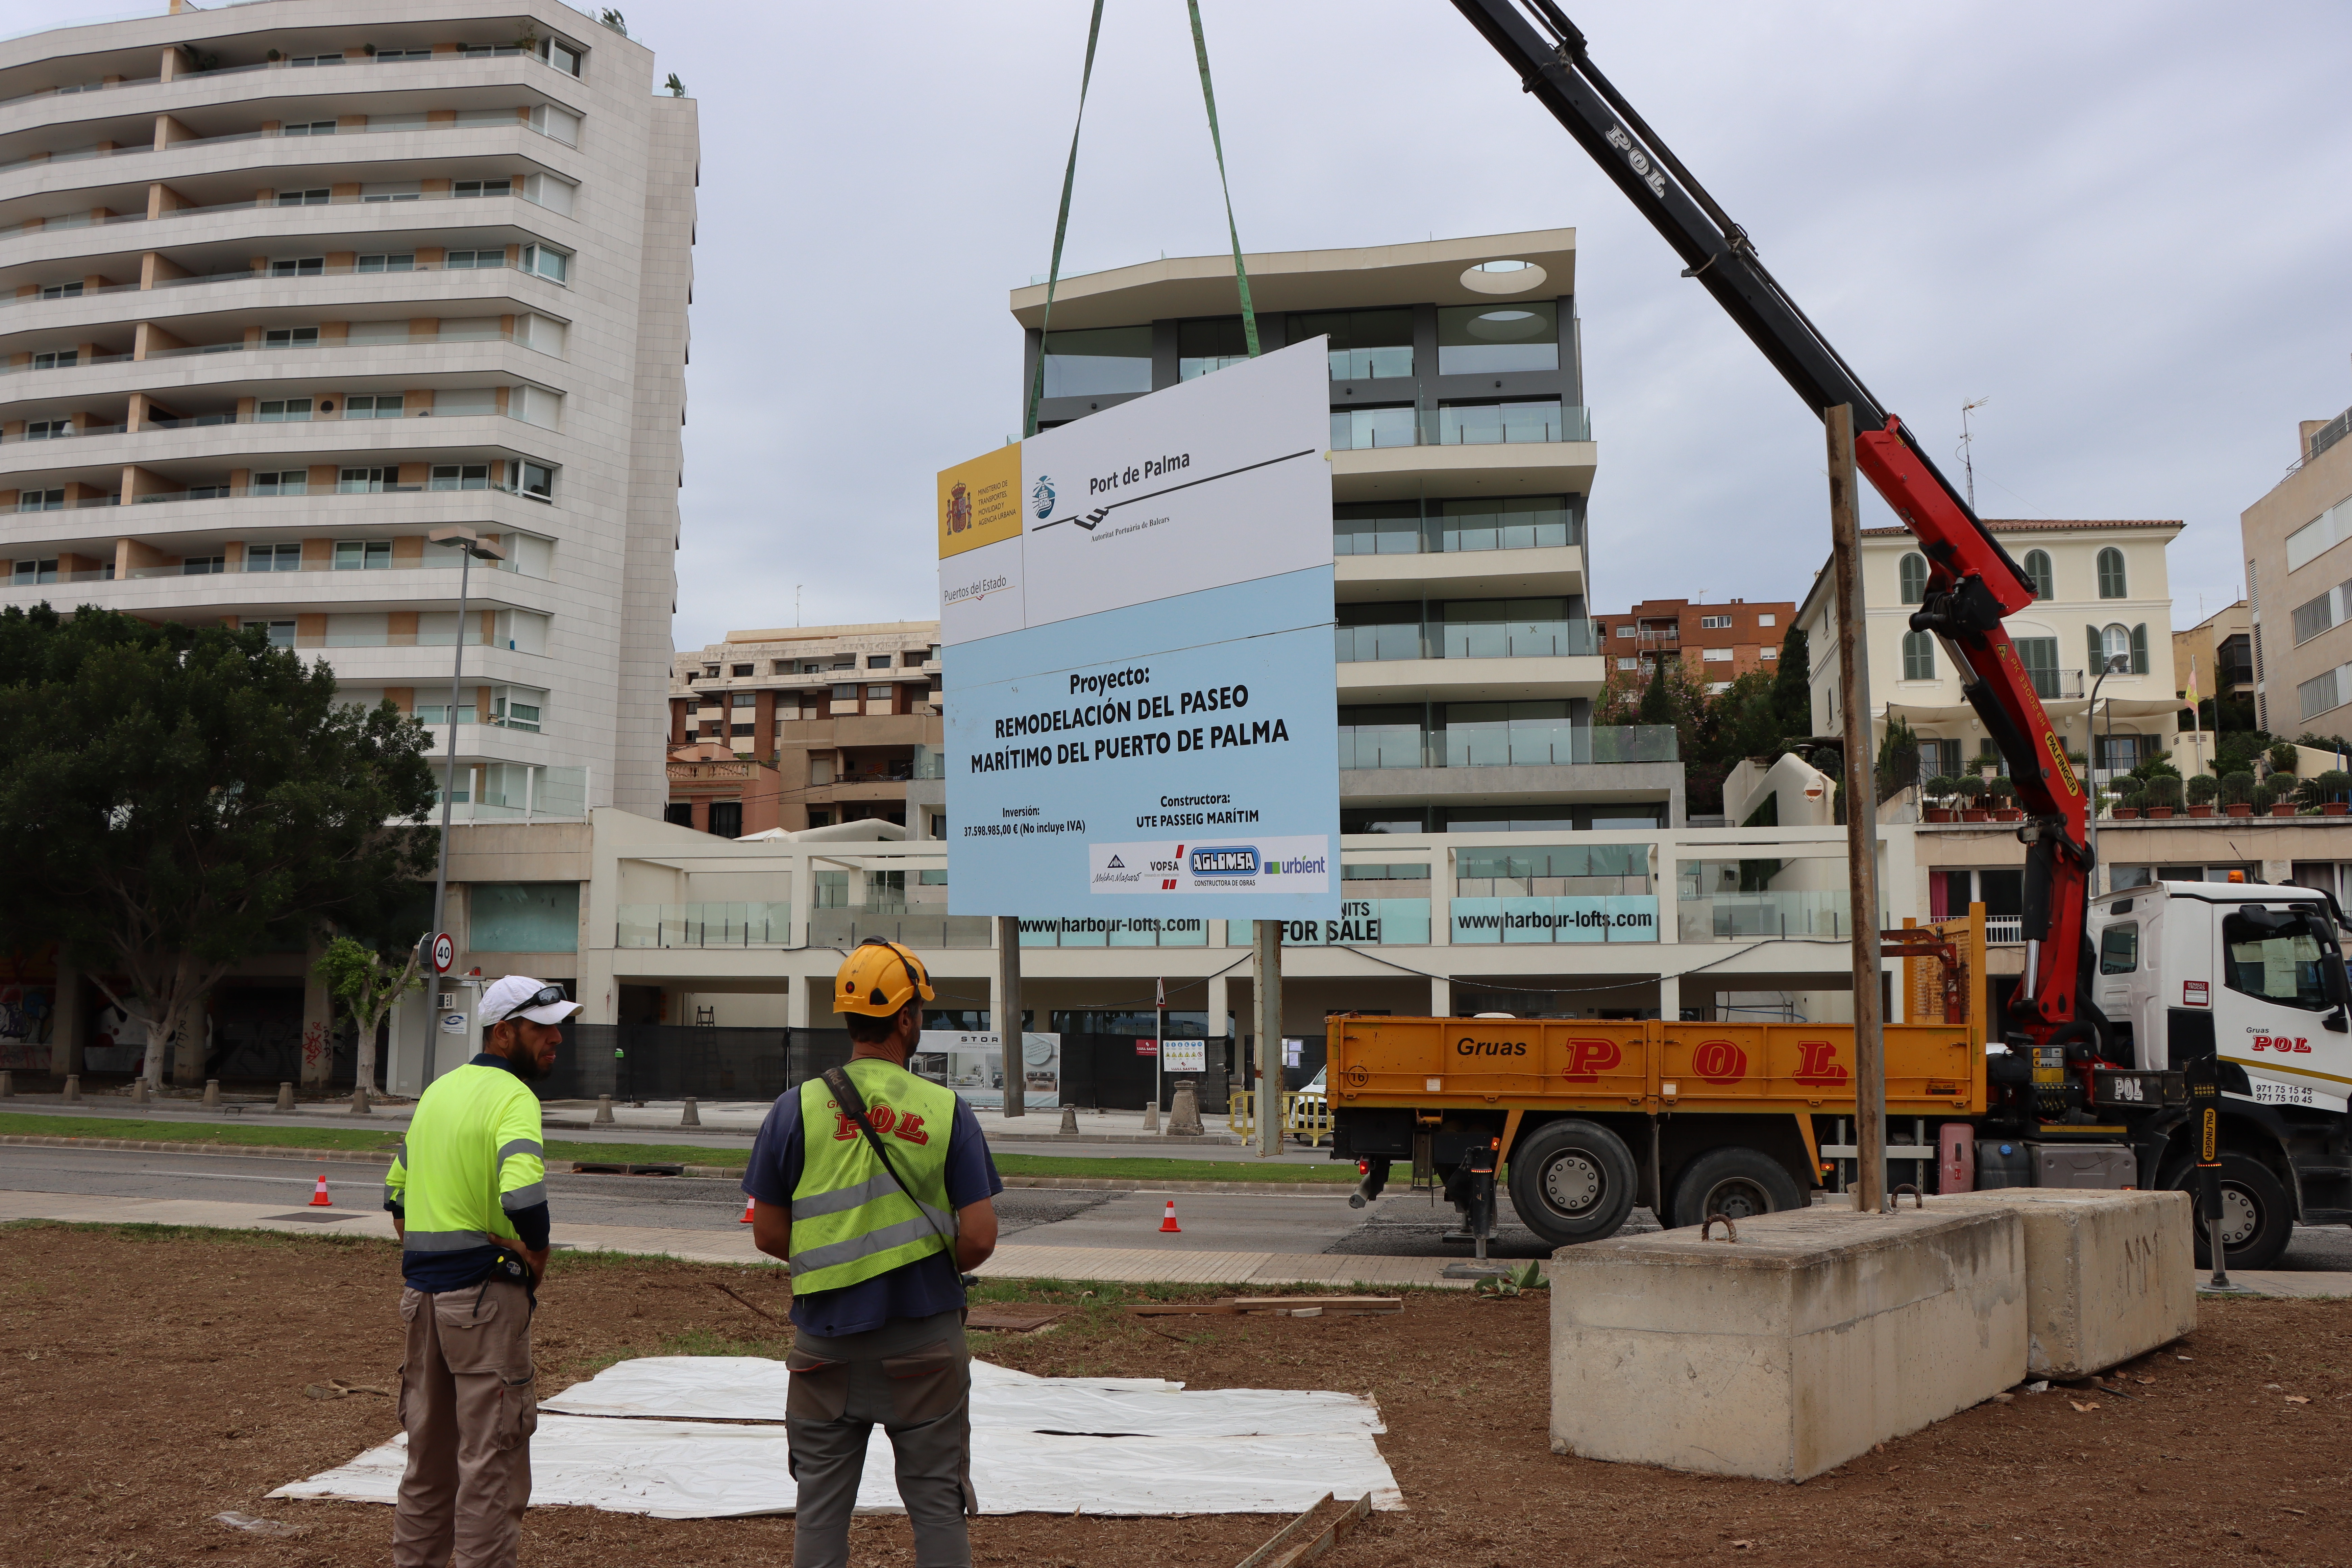 The work on Palma’s Seafront Promenade begins